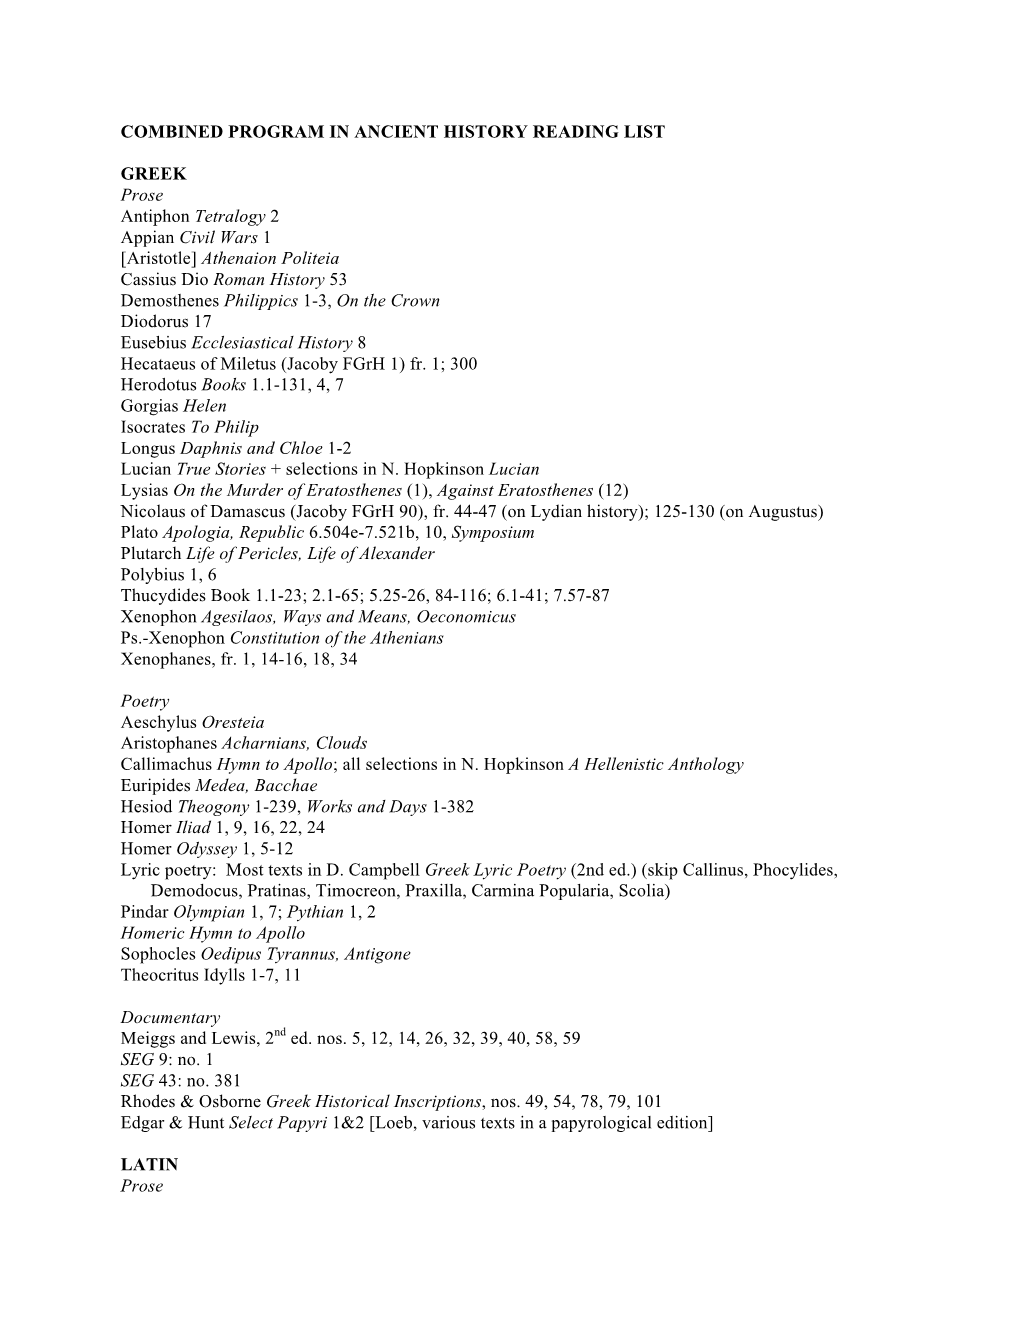 Finalcombined Program in Ancient History Reading List Rev